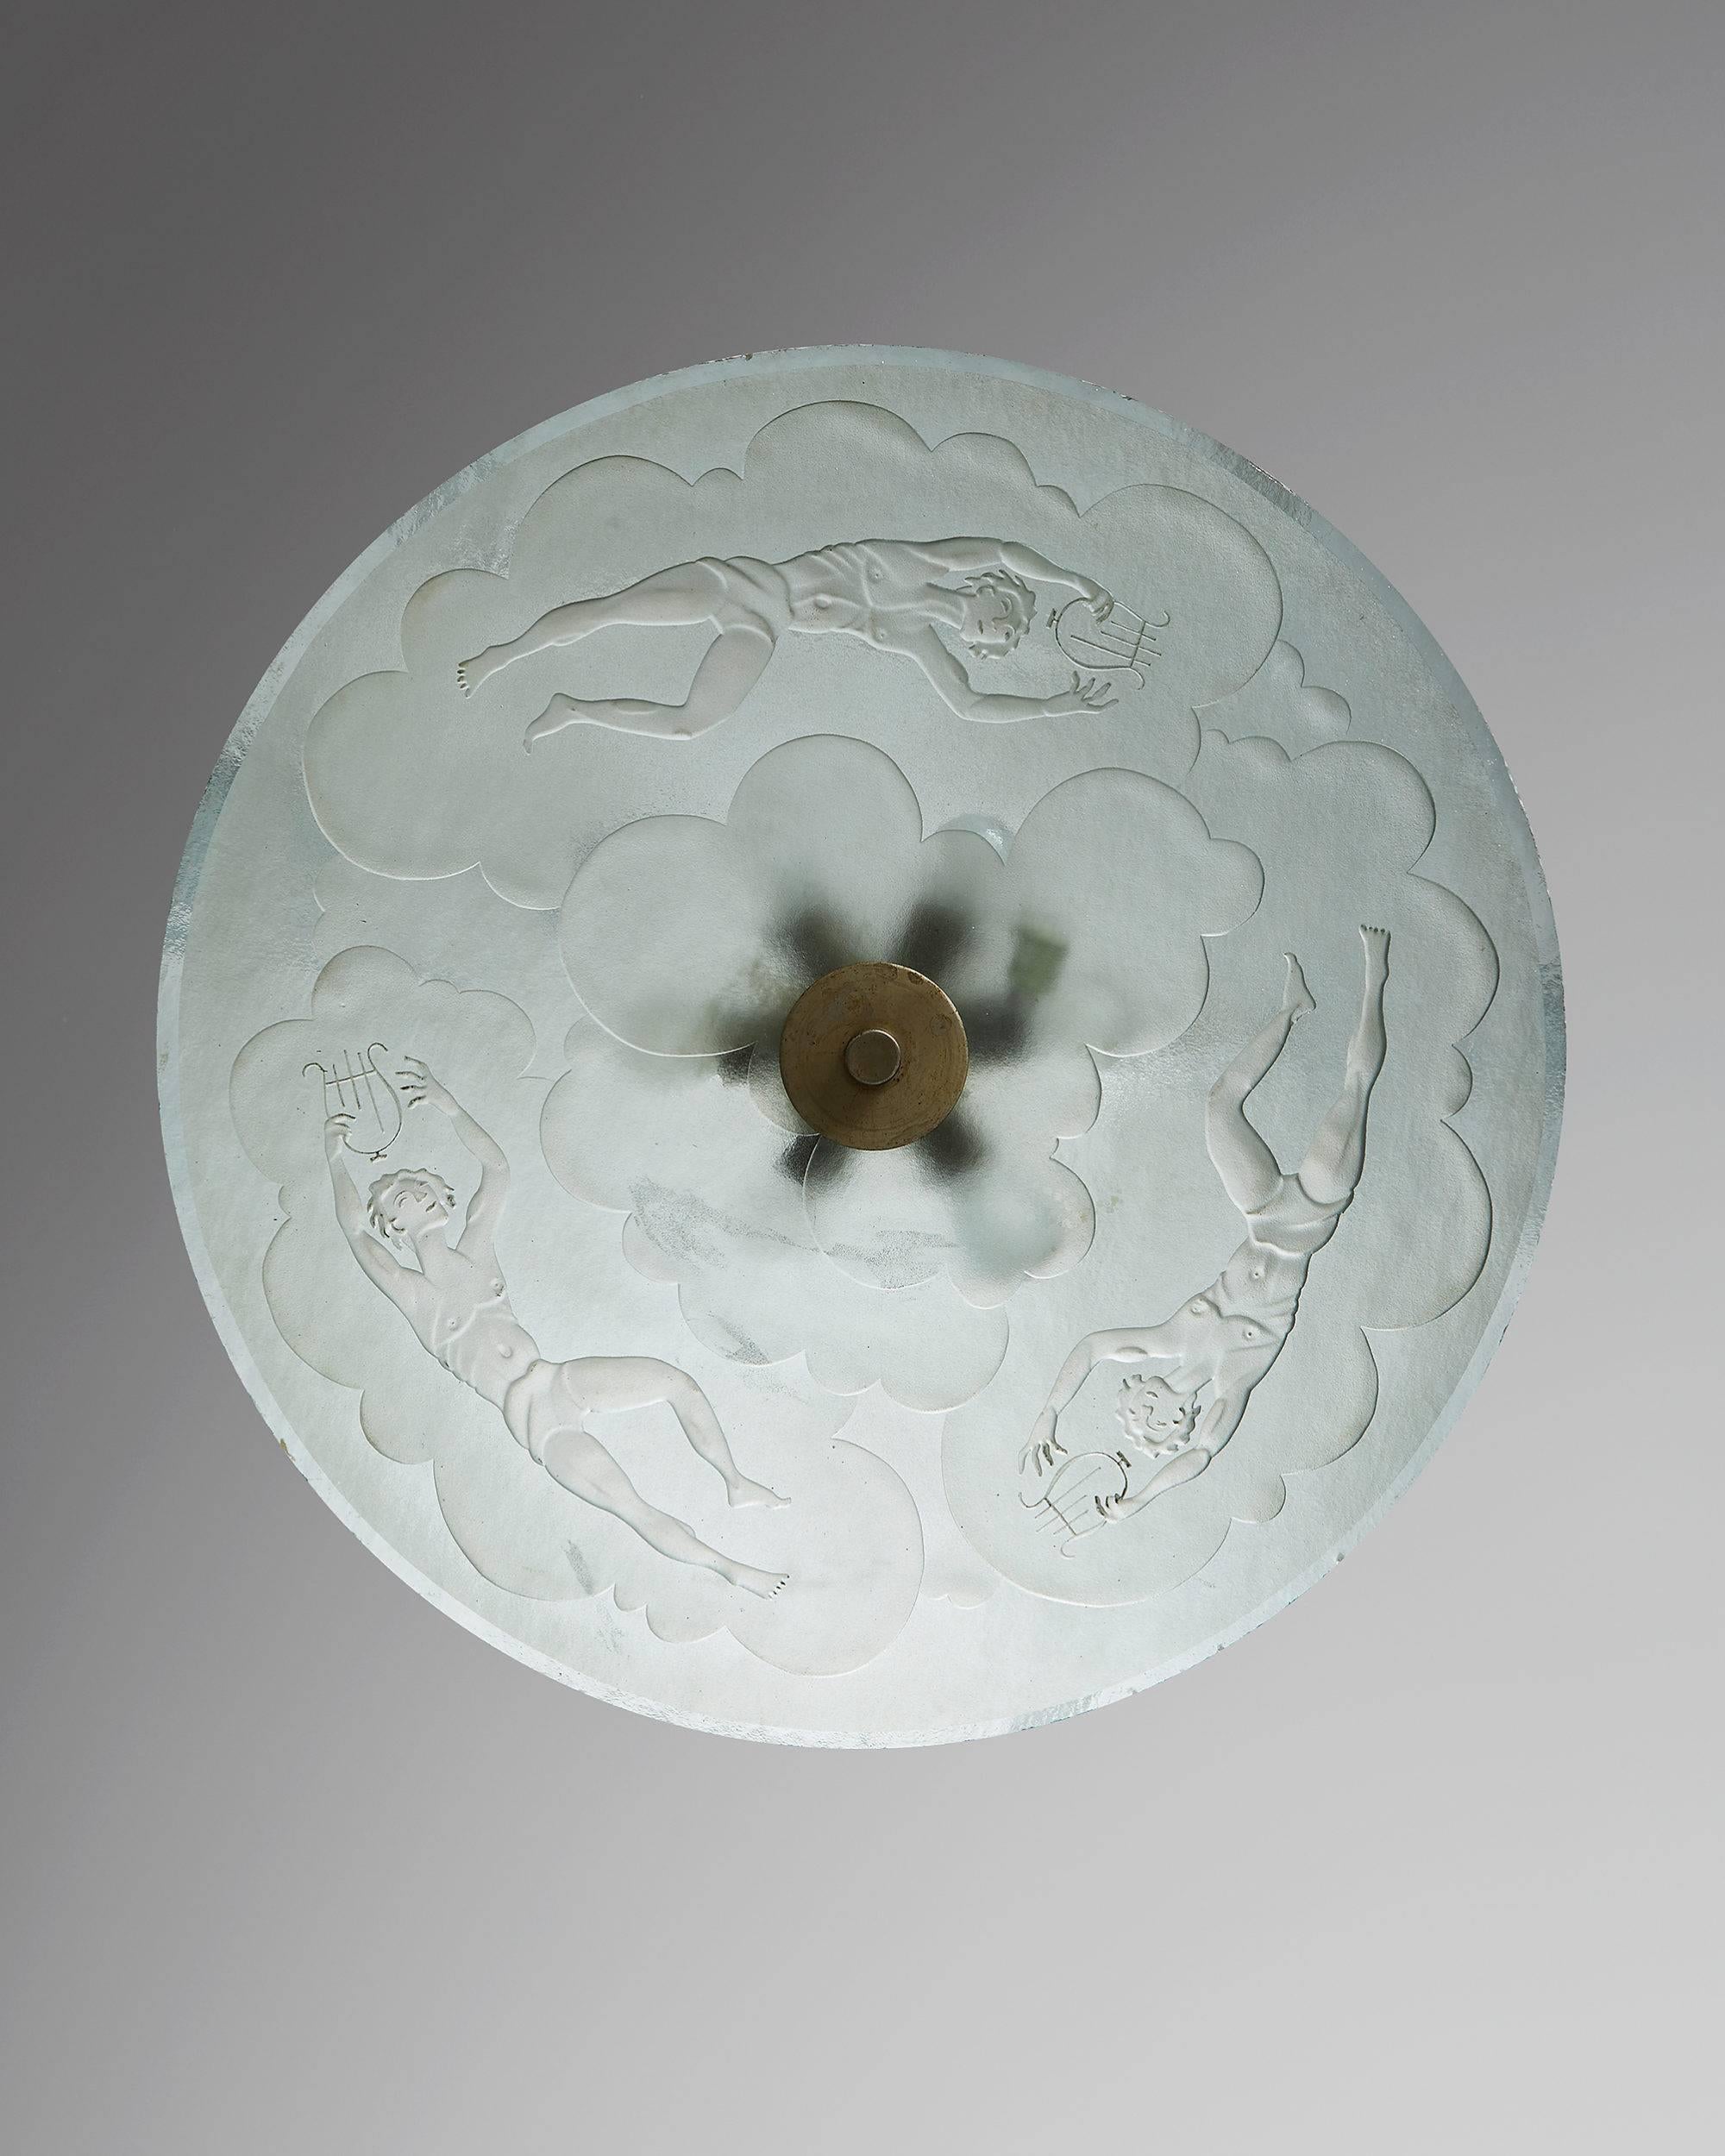 Ceiling lamp, anonymous, Sweden, 1930s. Etched glass and brass.

Measures: D 78 cm/ 30 3/4